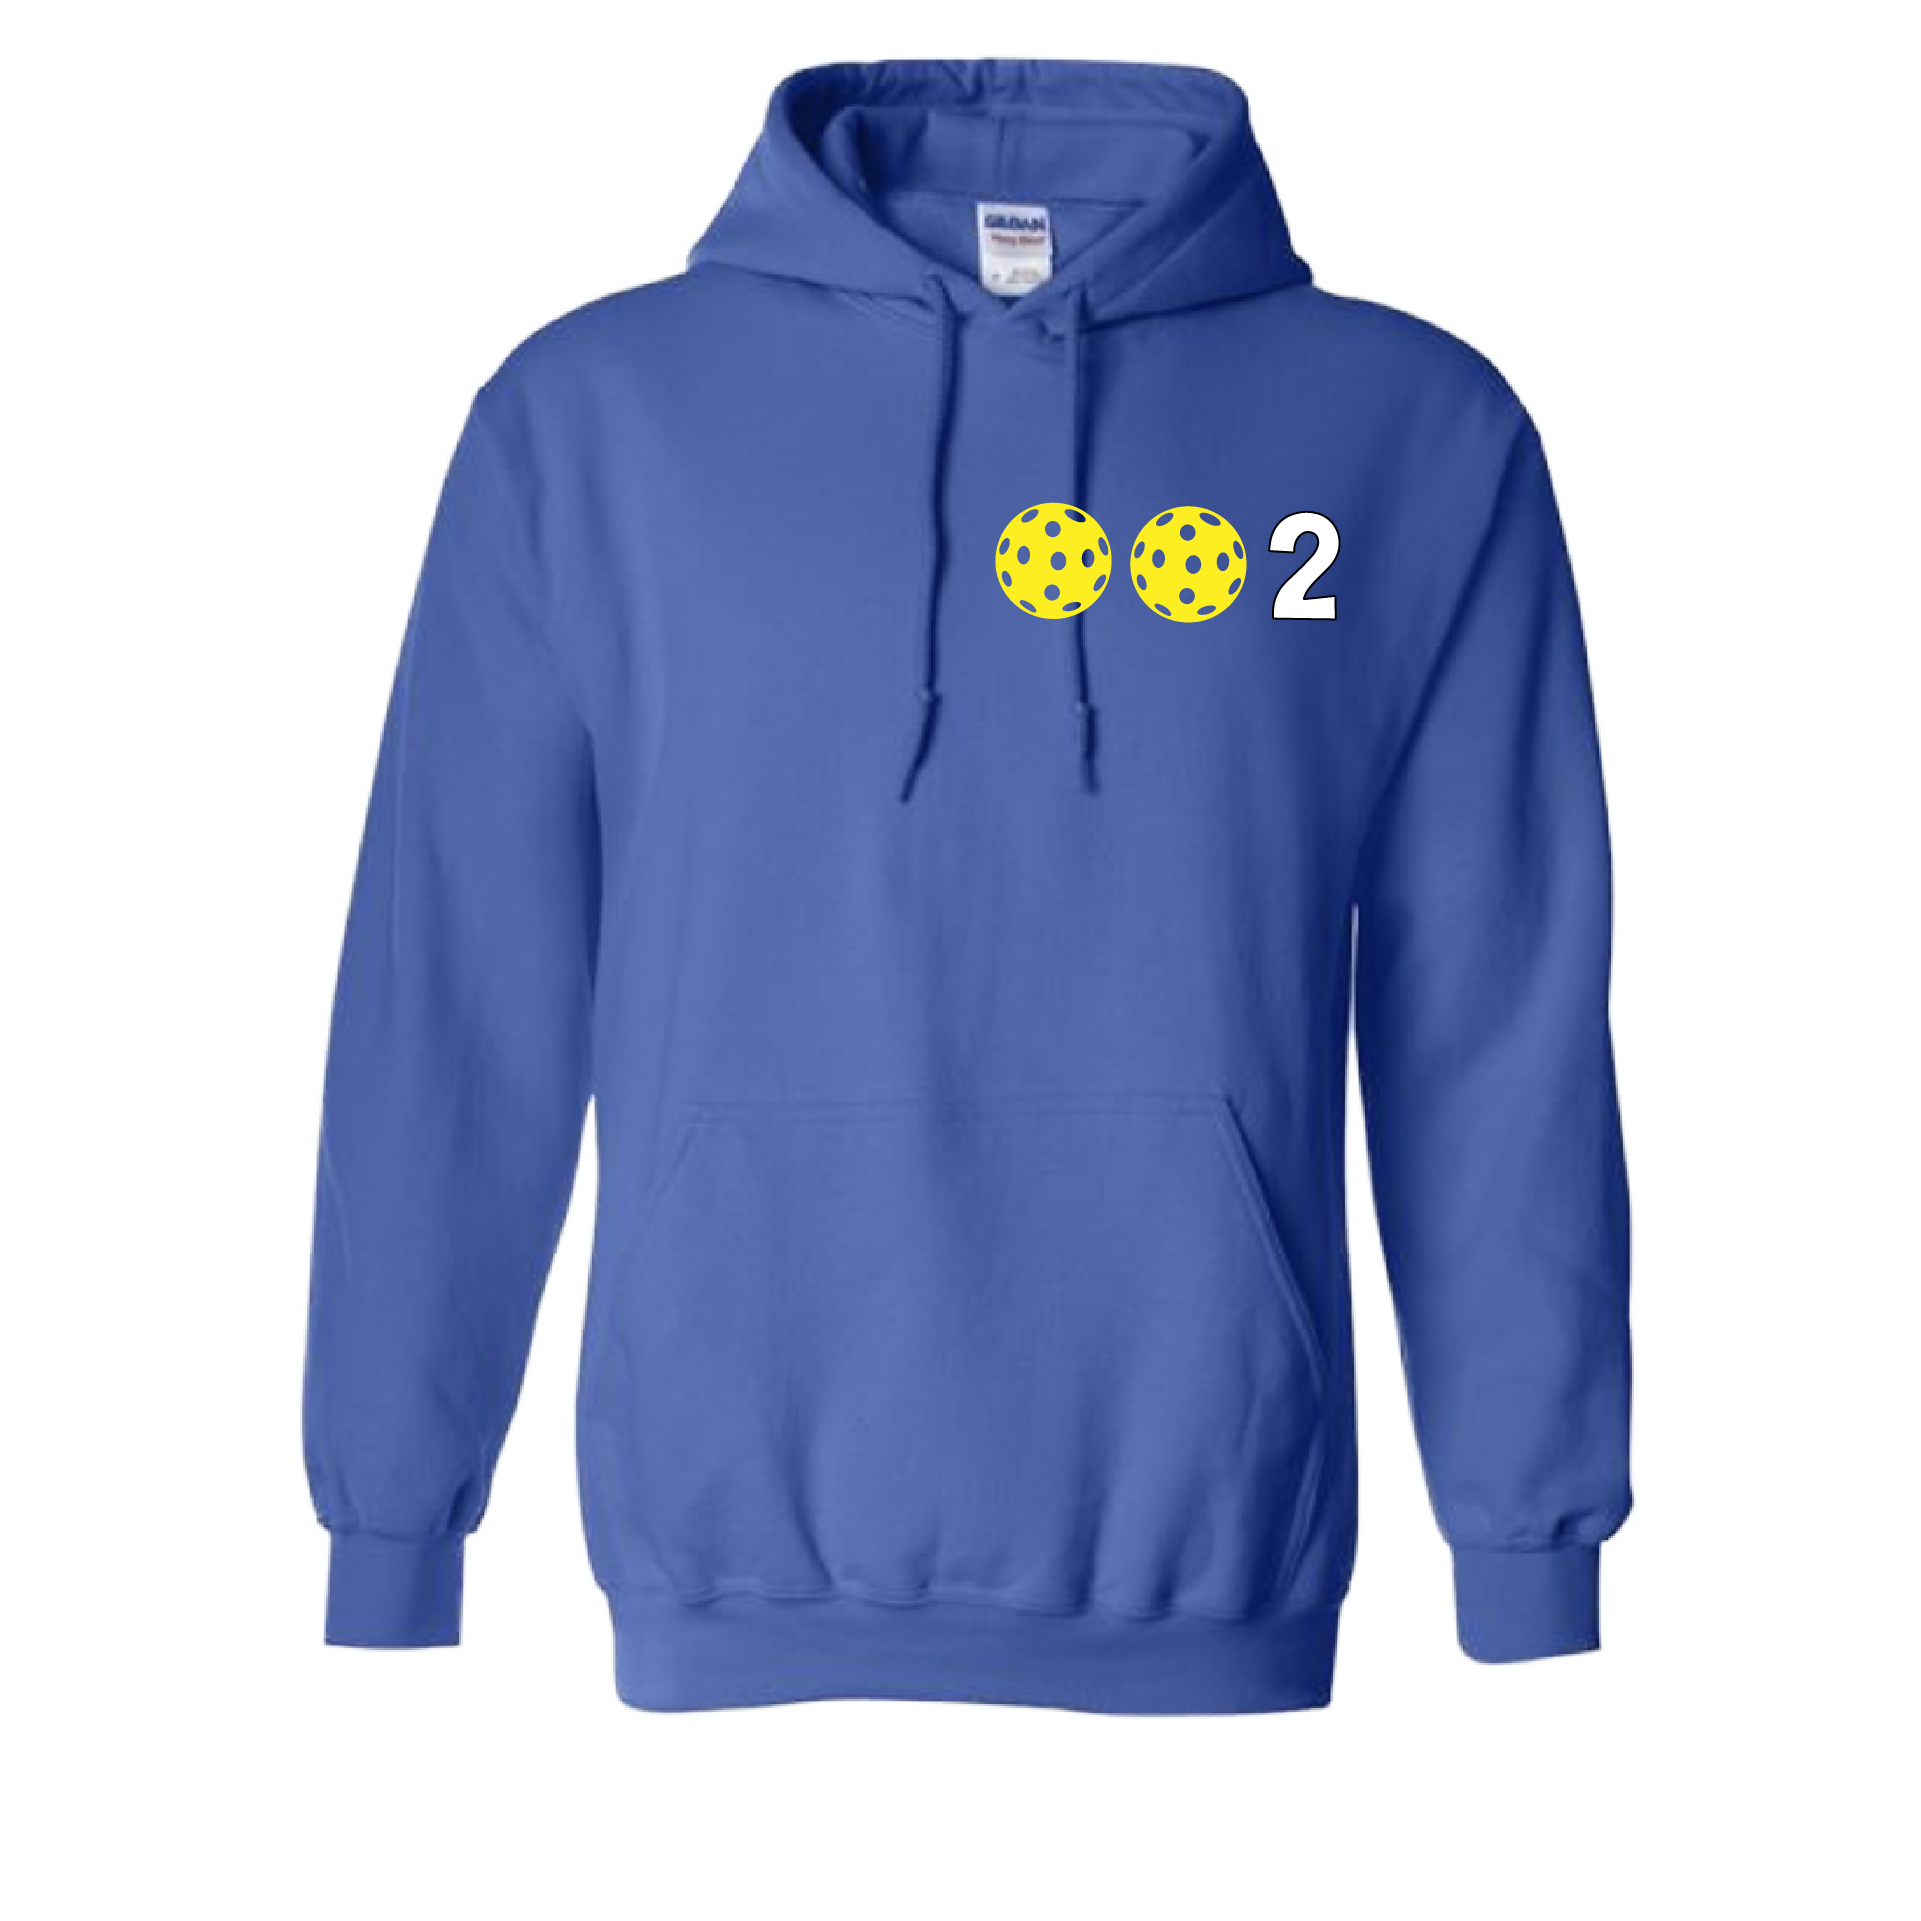 Design: 002 with Customizable Pickleball Ball colors (Yellow, White, Green)  Unisex Hooded Sweatshirt: Moisture-wicking, double-lined hood, front pouch pocket.  This unisex hooded sweatshirt is ultra comfortable and soft. Stay warm on the Pickleball courts while being that hit with this one of kind design.